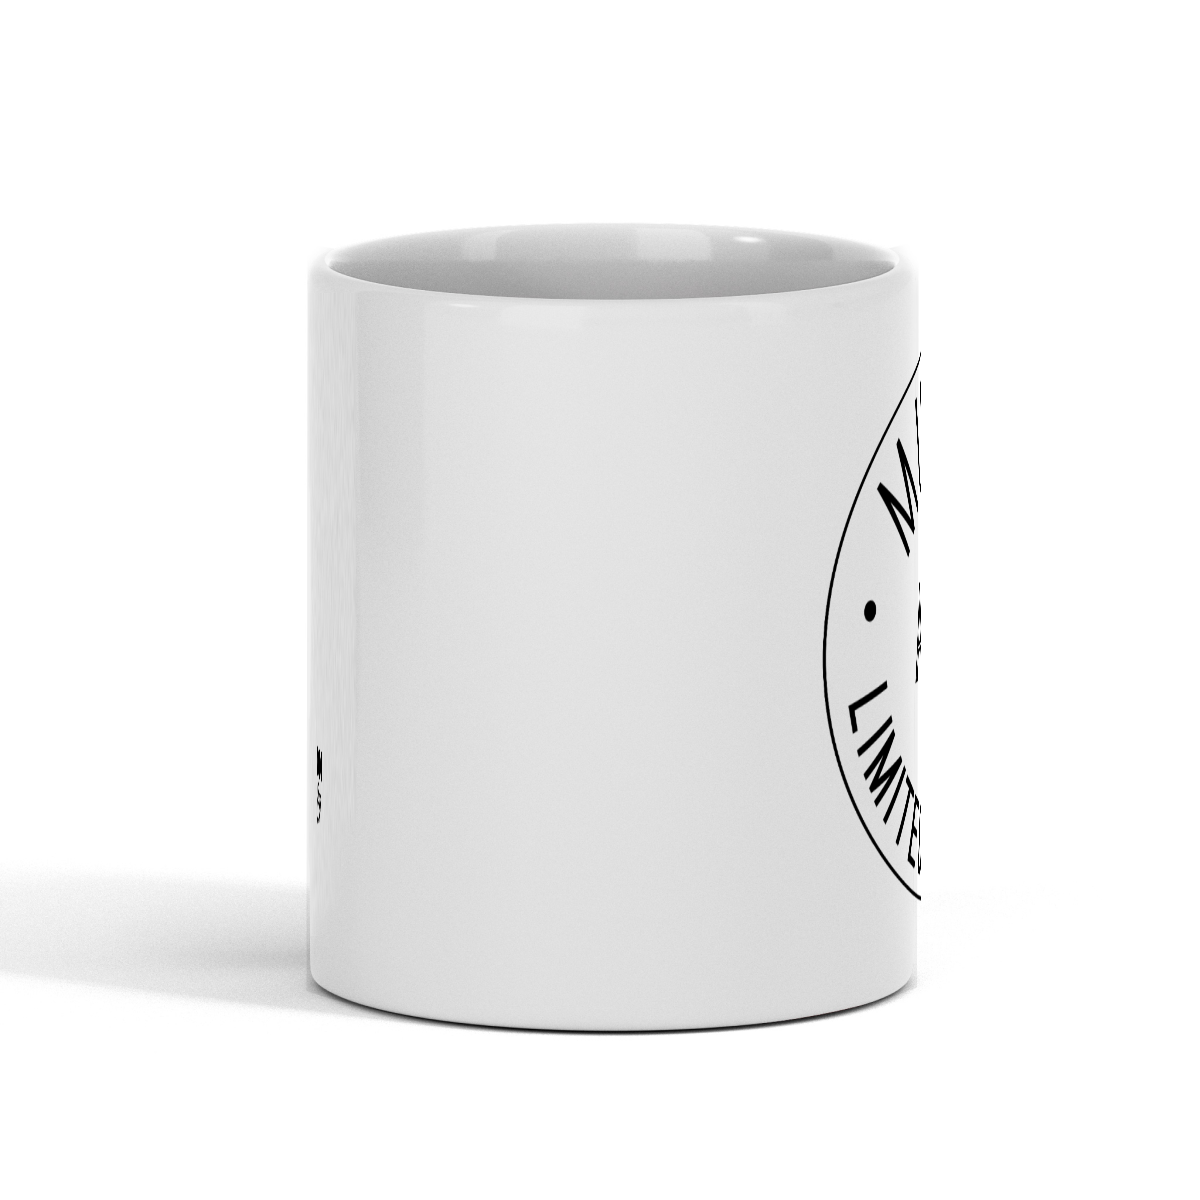 Mutts Are Limited Edition Coffee Mug